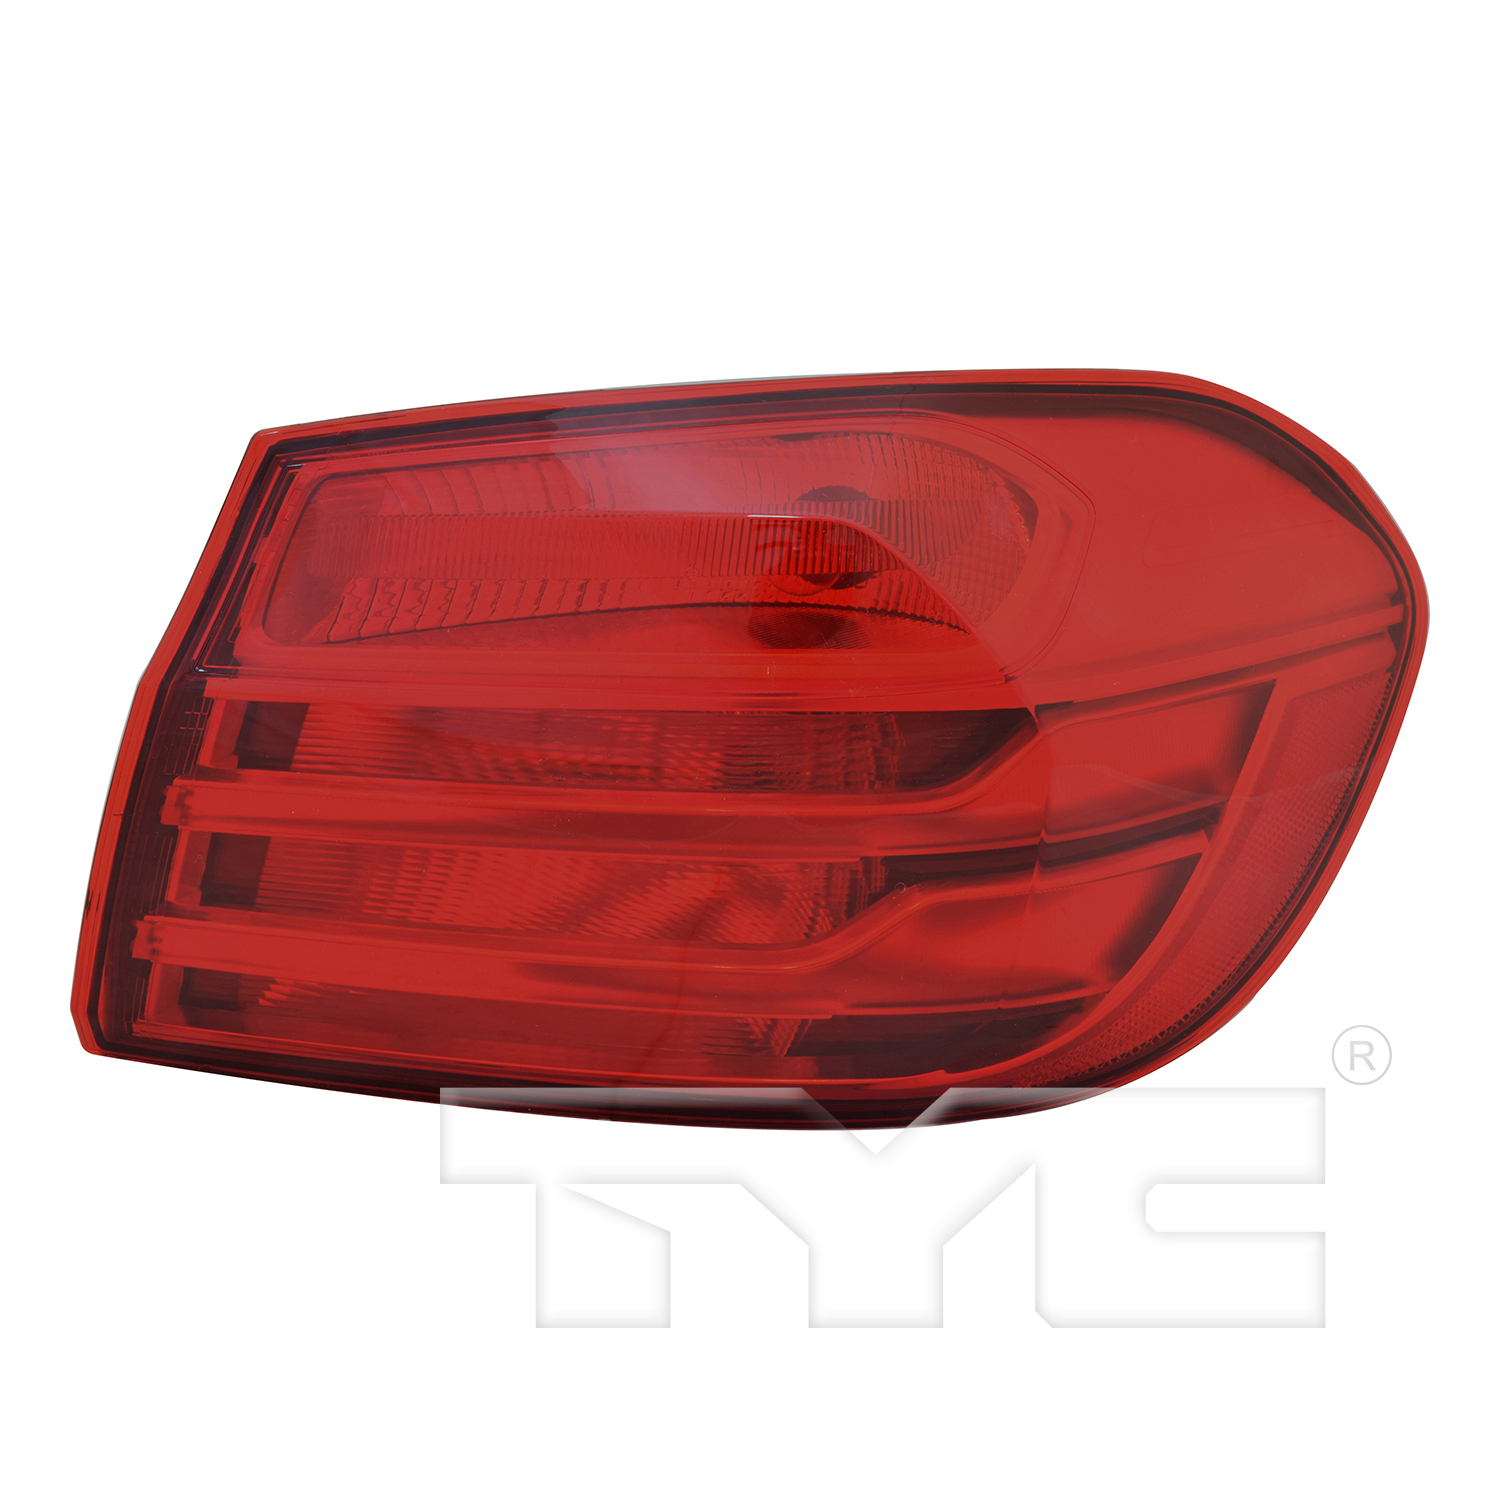 Aftermarket TAILLIGHTS for BMW - M4, M4,15-17,RT Taillamp assy outer